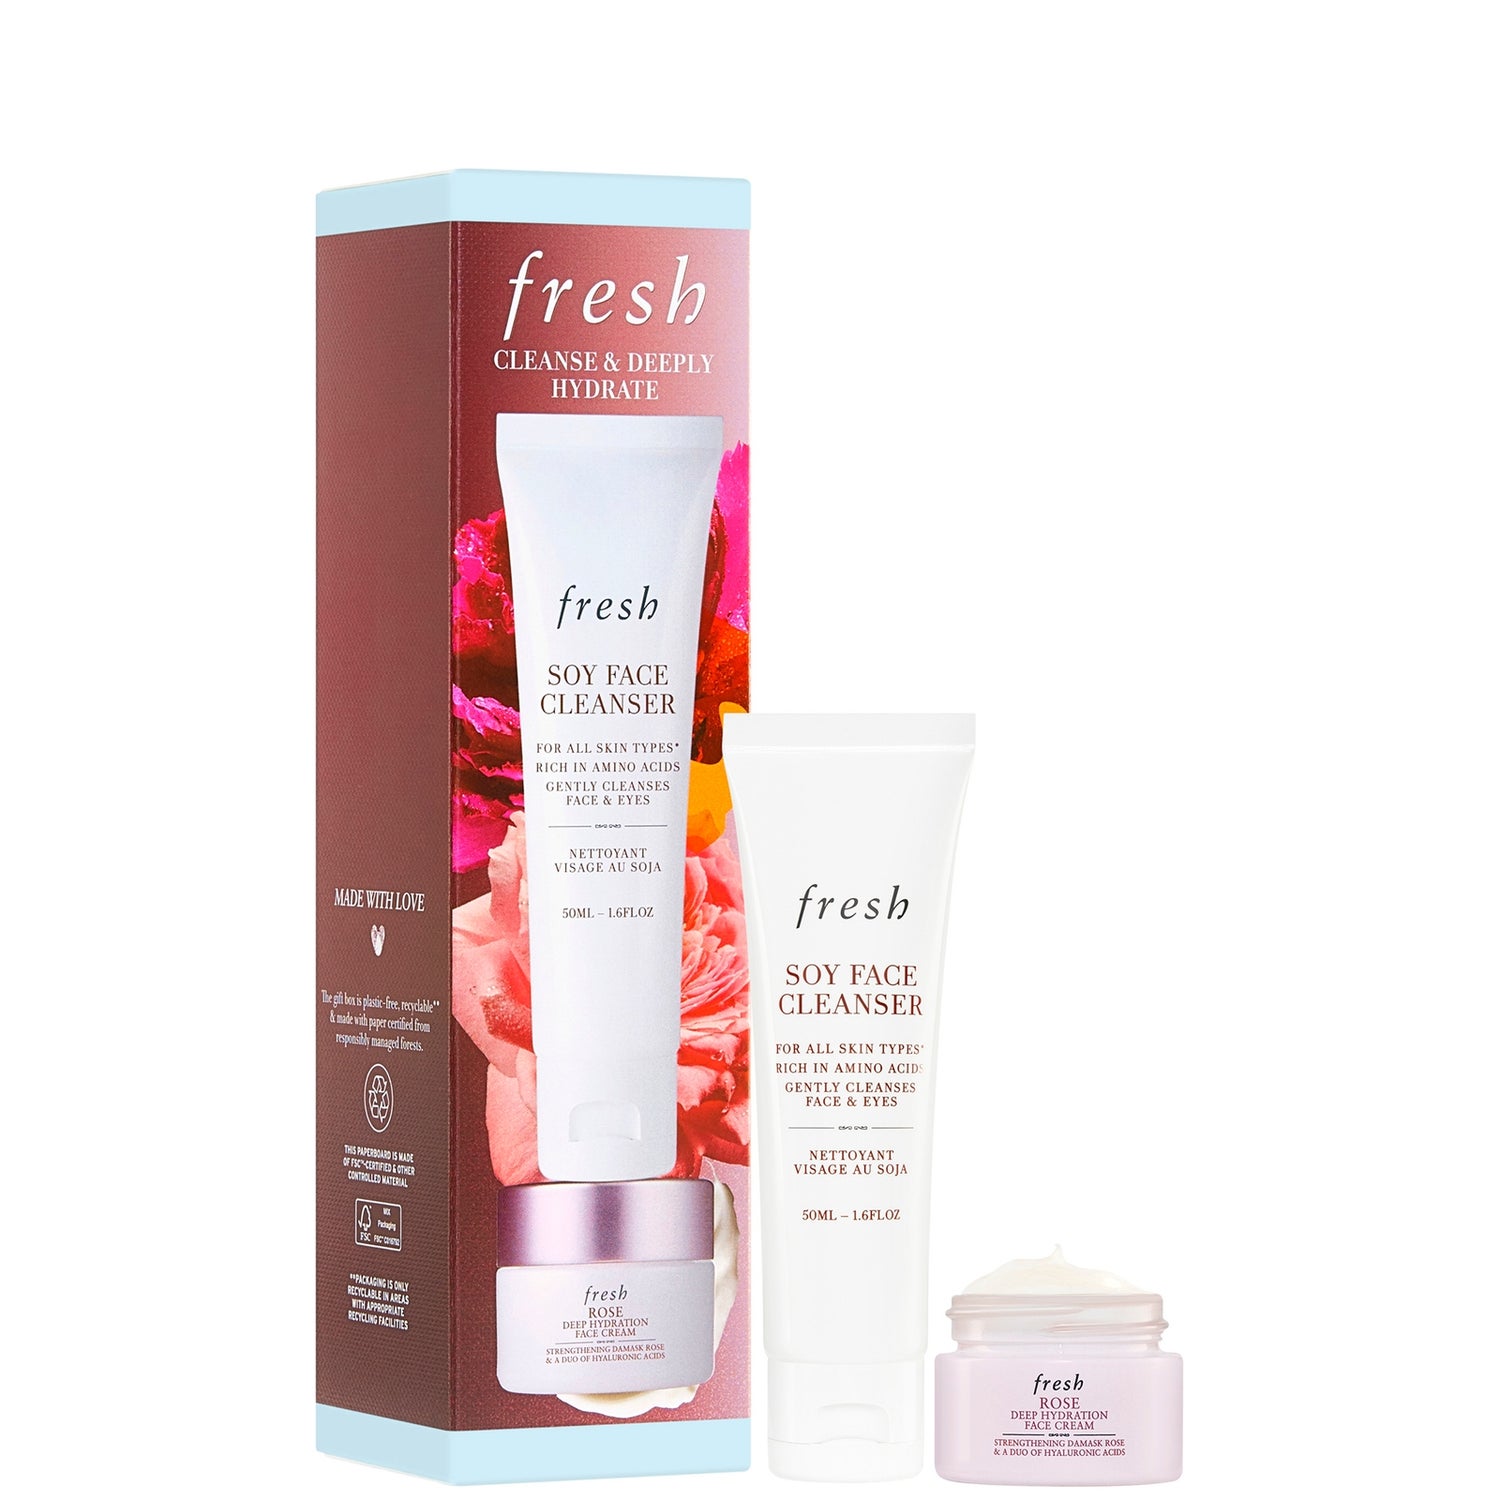 Fresh Cleanse & Deeply Hydrate Duo (Worth £31.00)